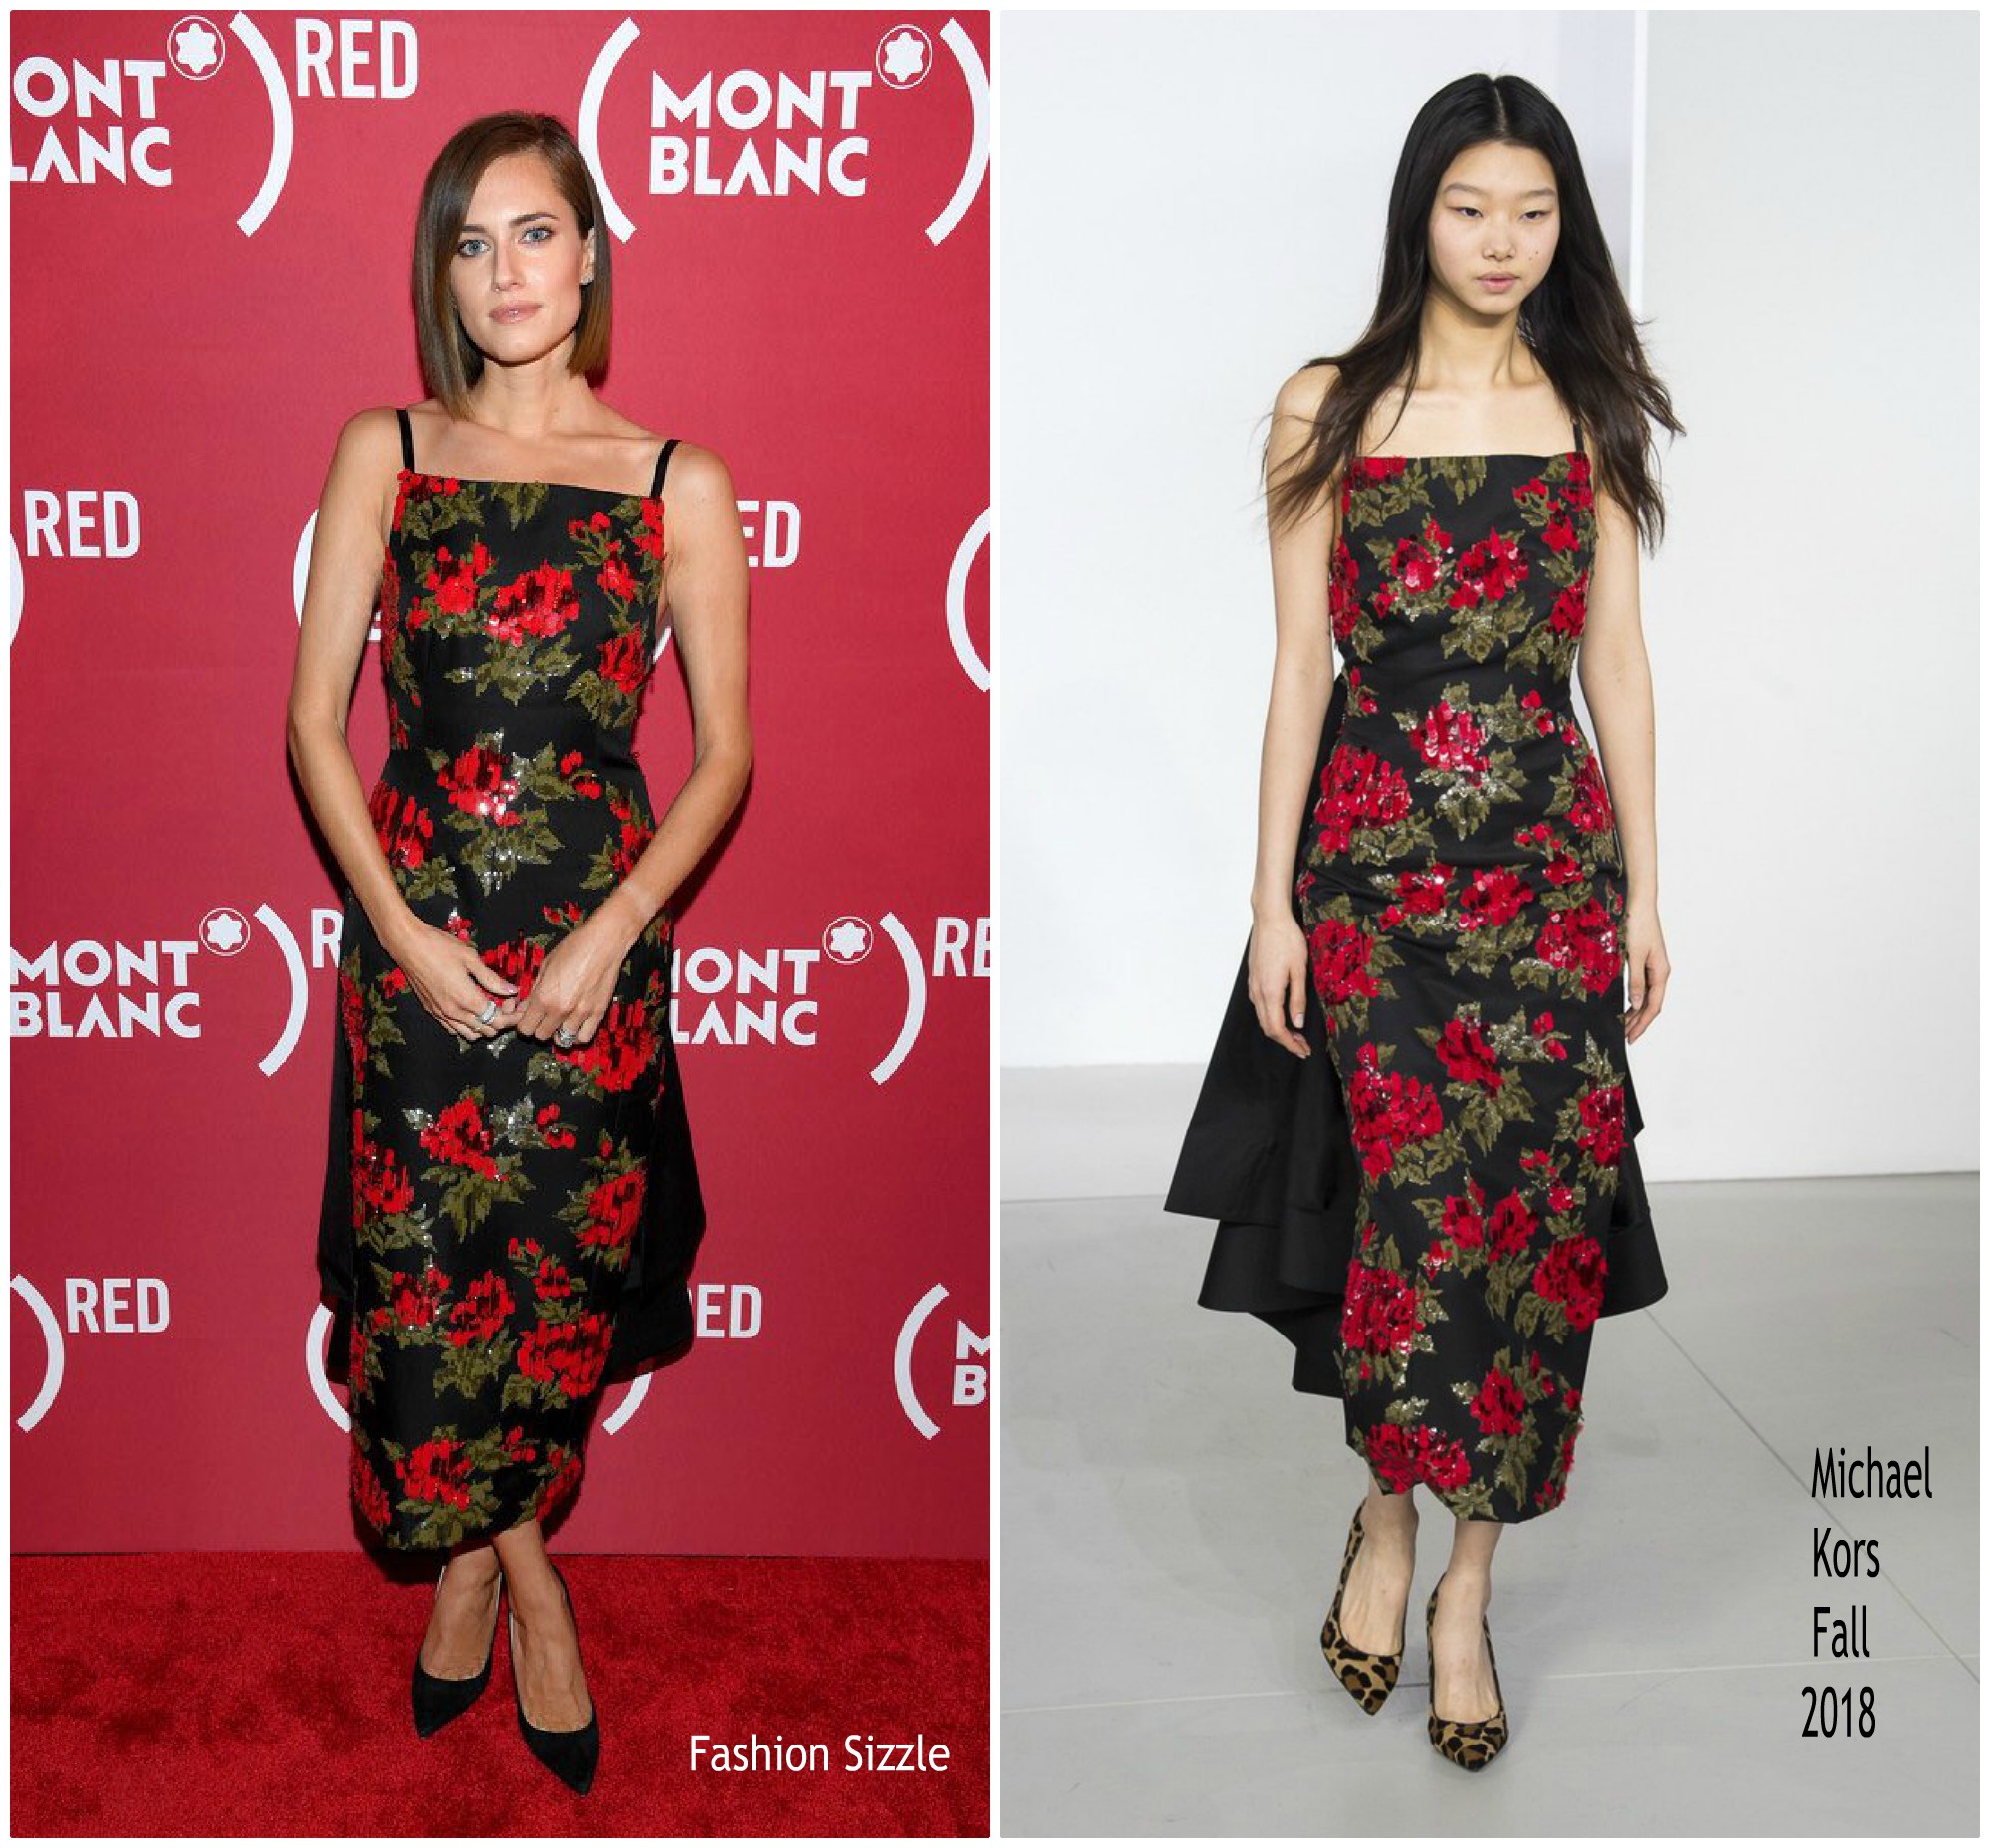 Allison Williams in Michael Kors Collection  @ The New (Montblanc M)RED Collection Event